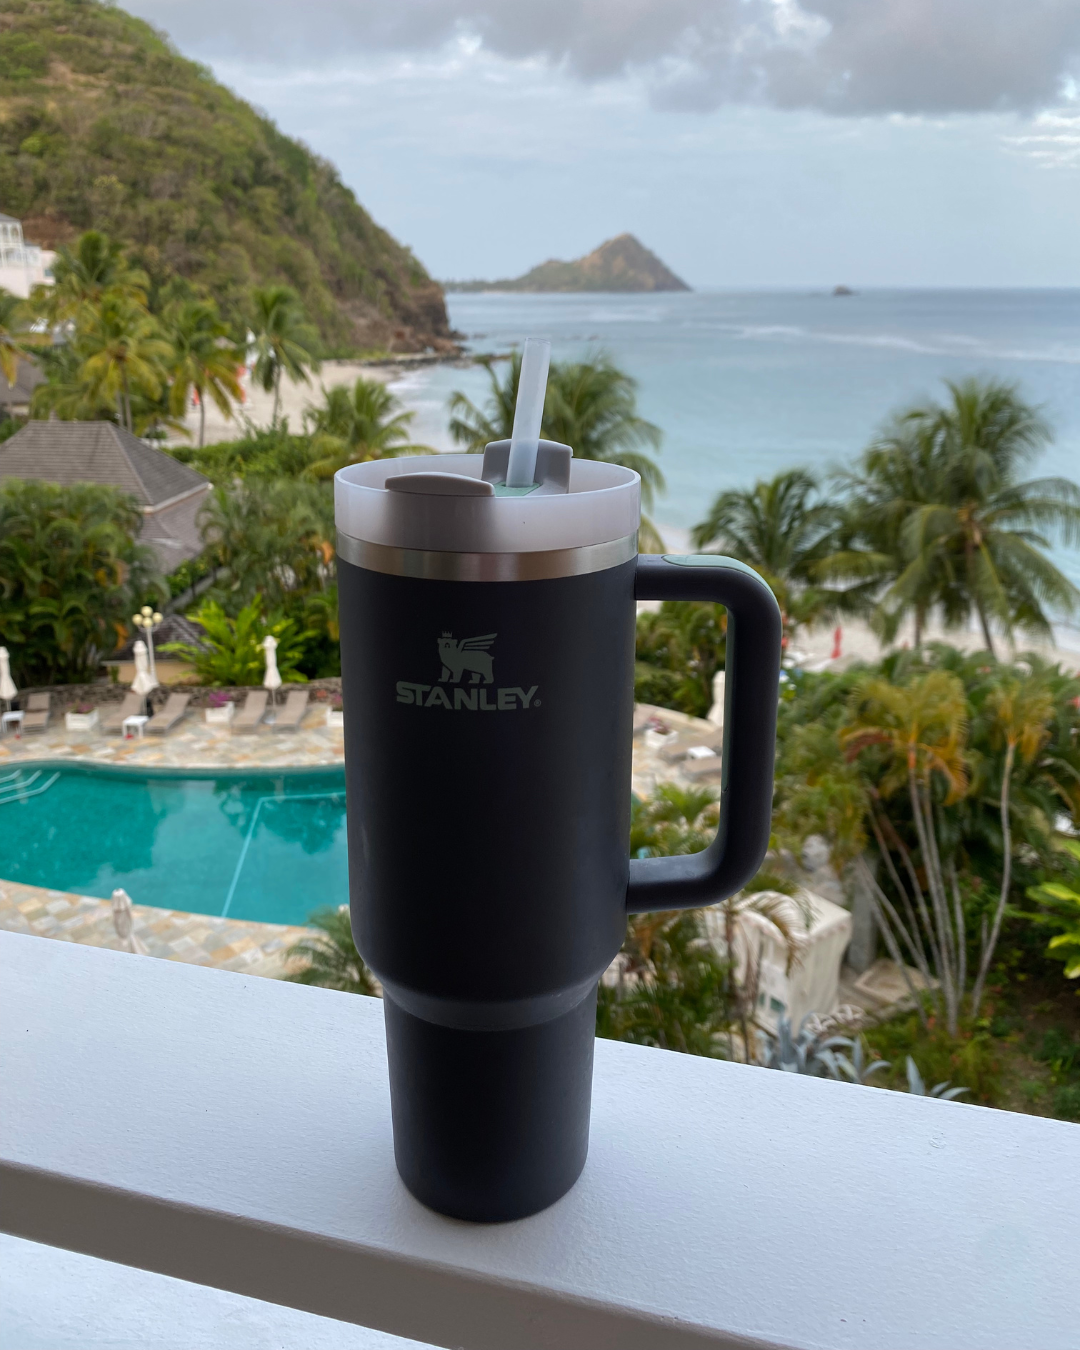 Stanley Quencher Cup review: Is the viral water bottle worth £44.99?